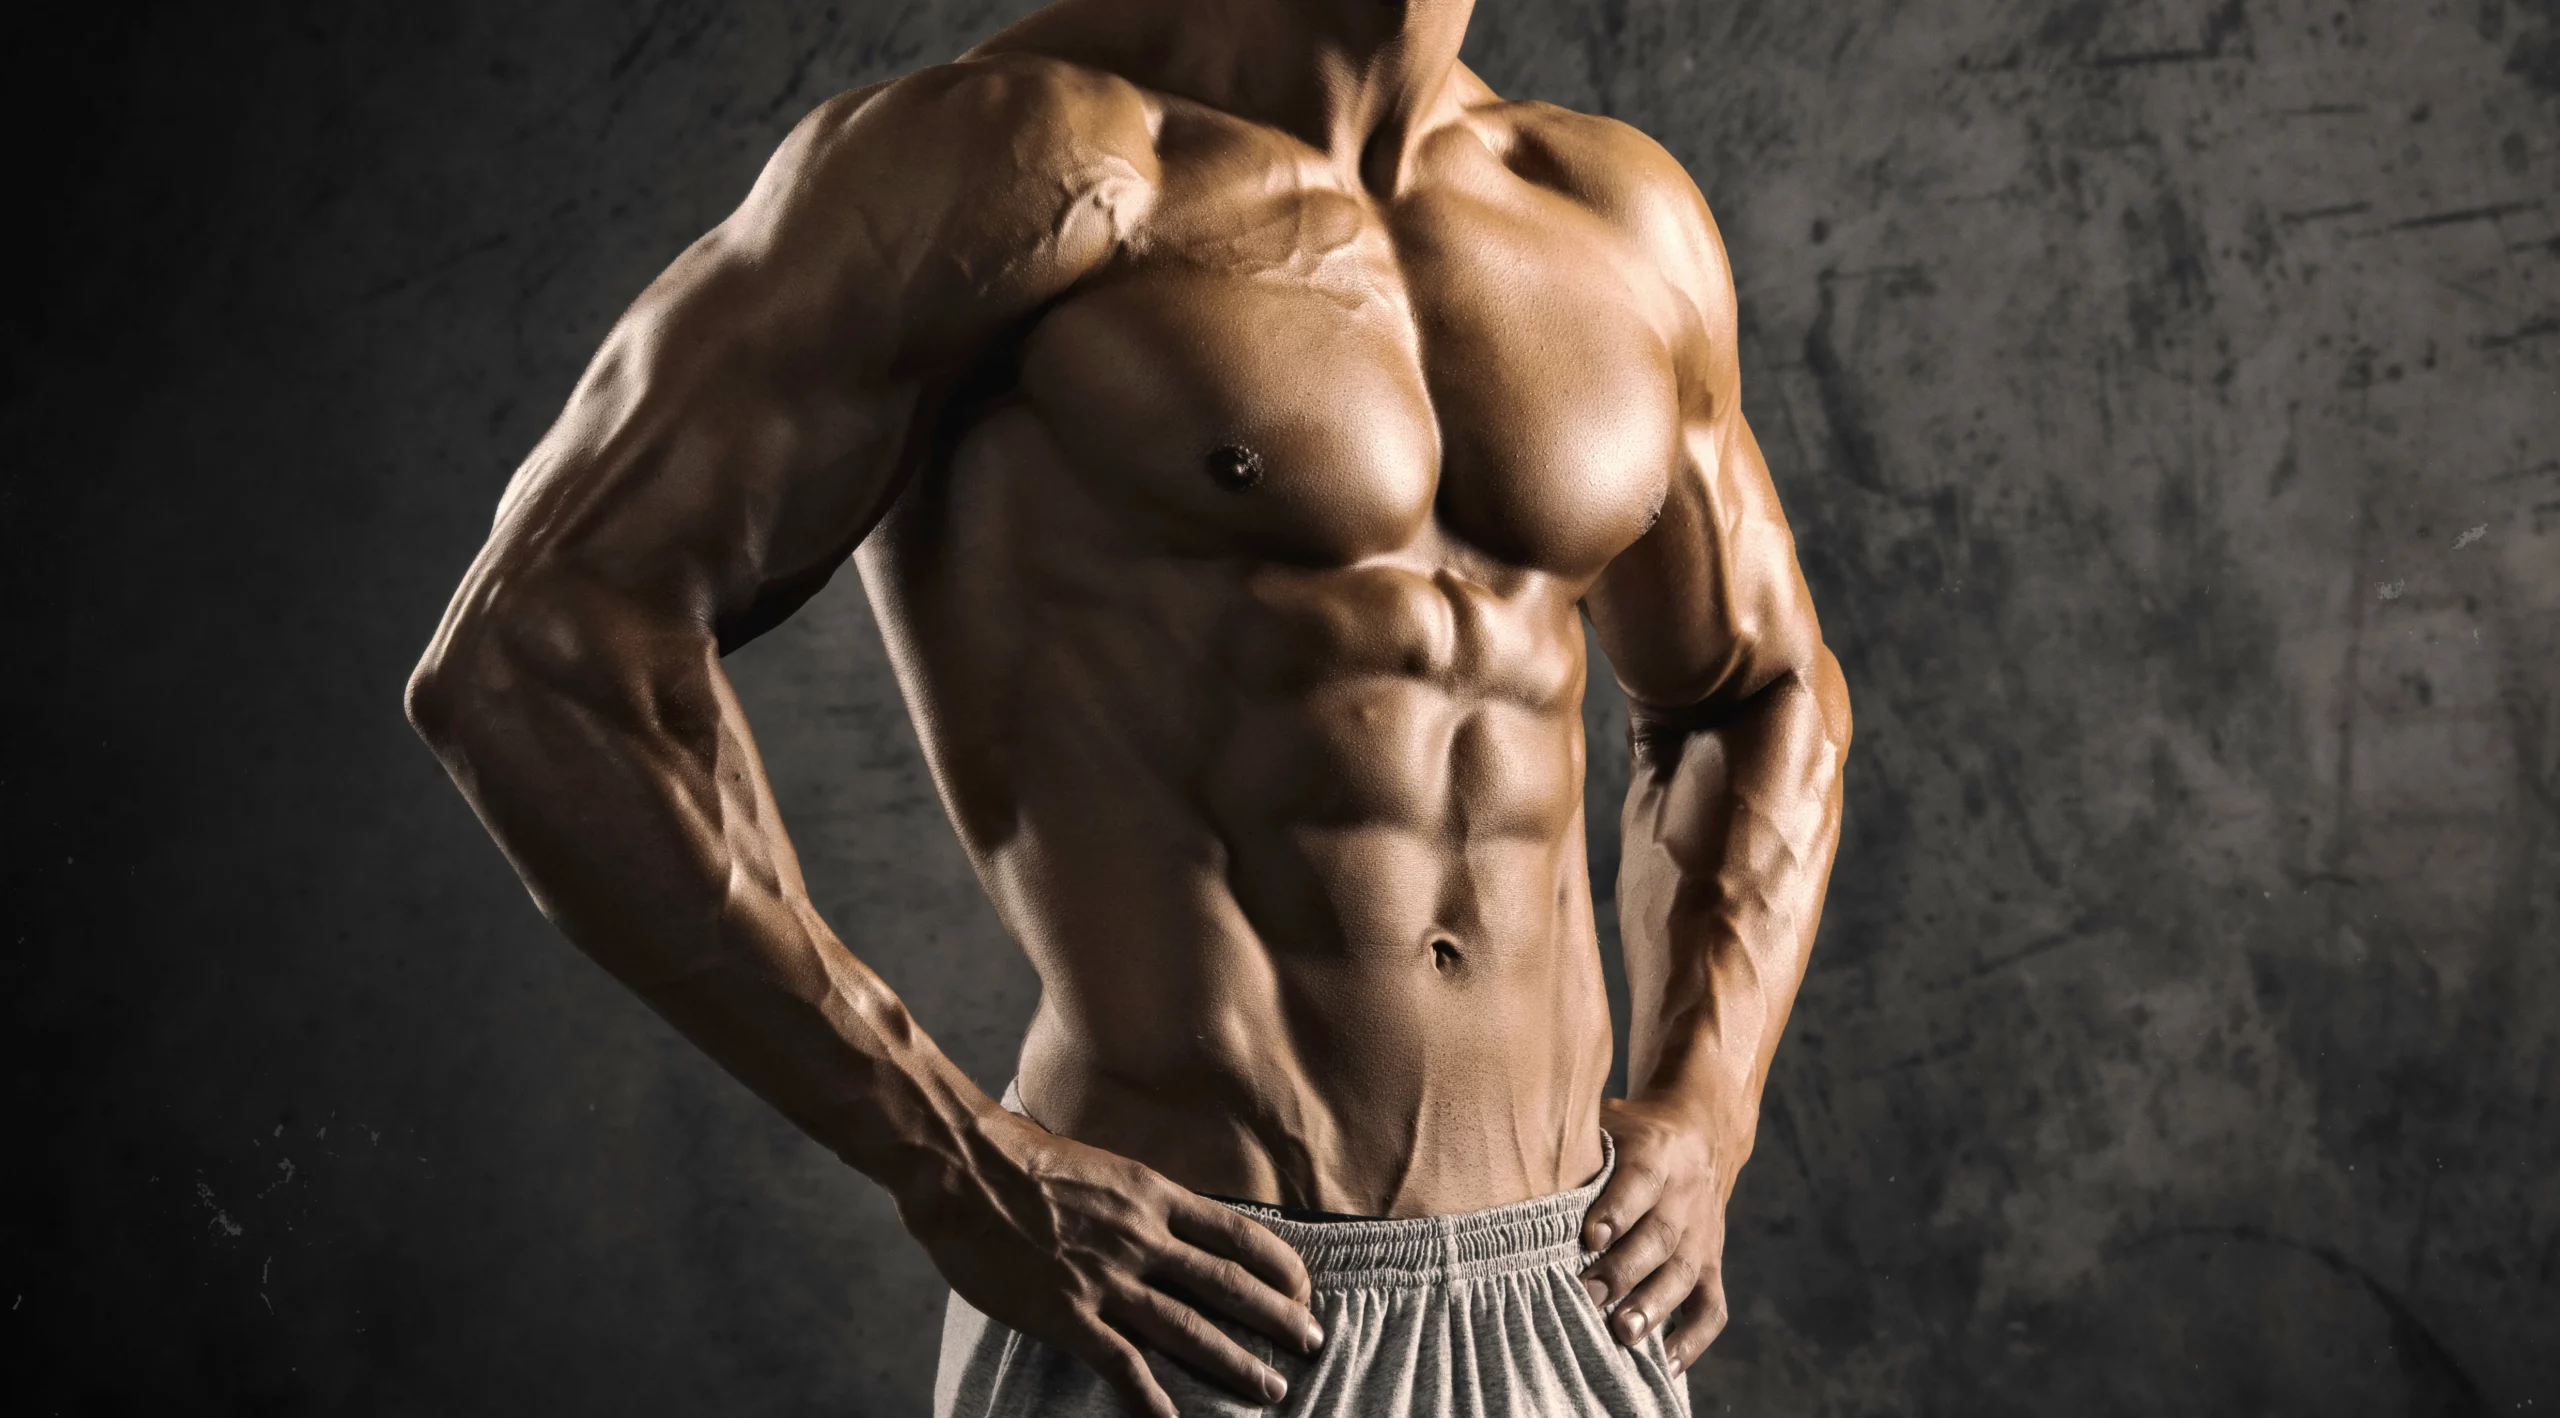 Can Testosterone Replacement Therapy Help Me Build Muscle?